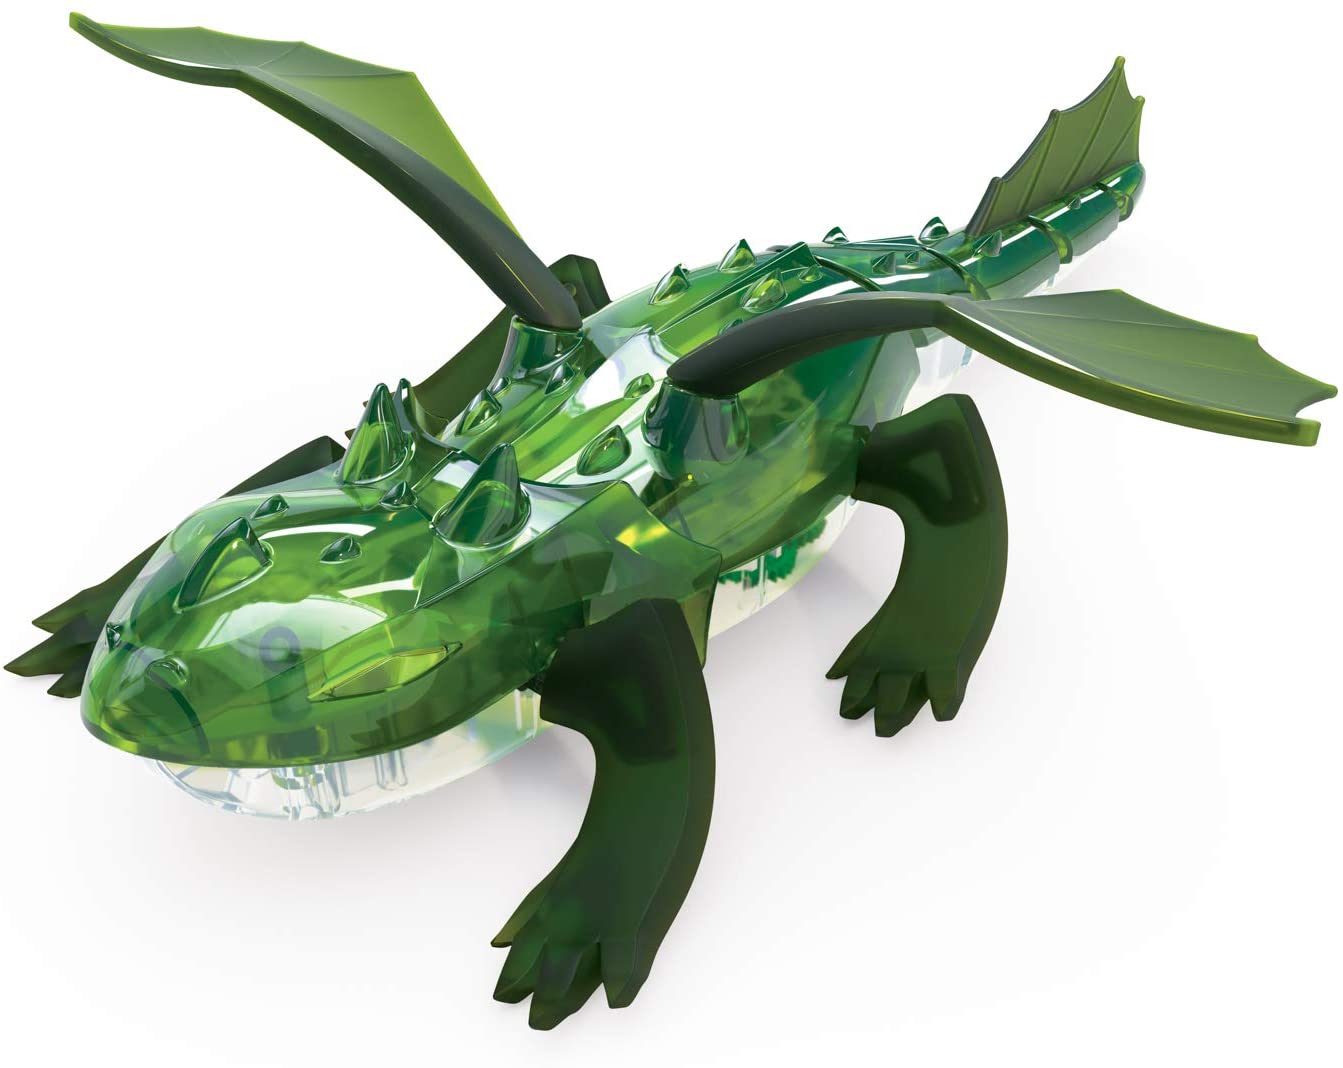 HEXBUG remote control dragon on Amazon in green with wings and flexible feet